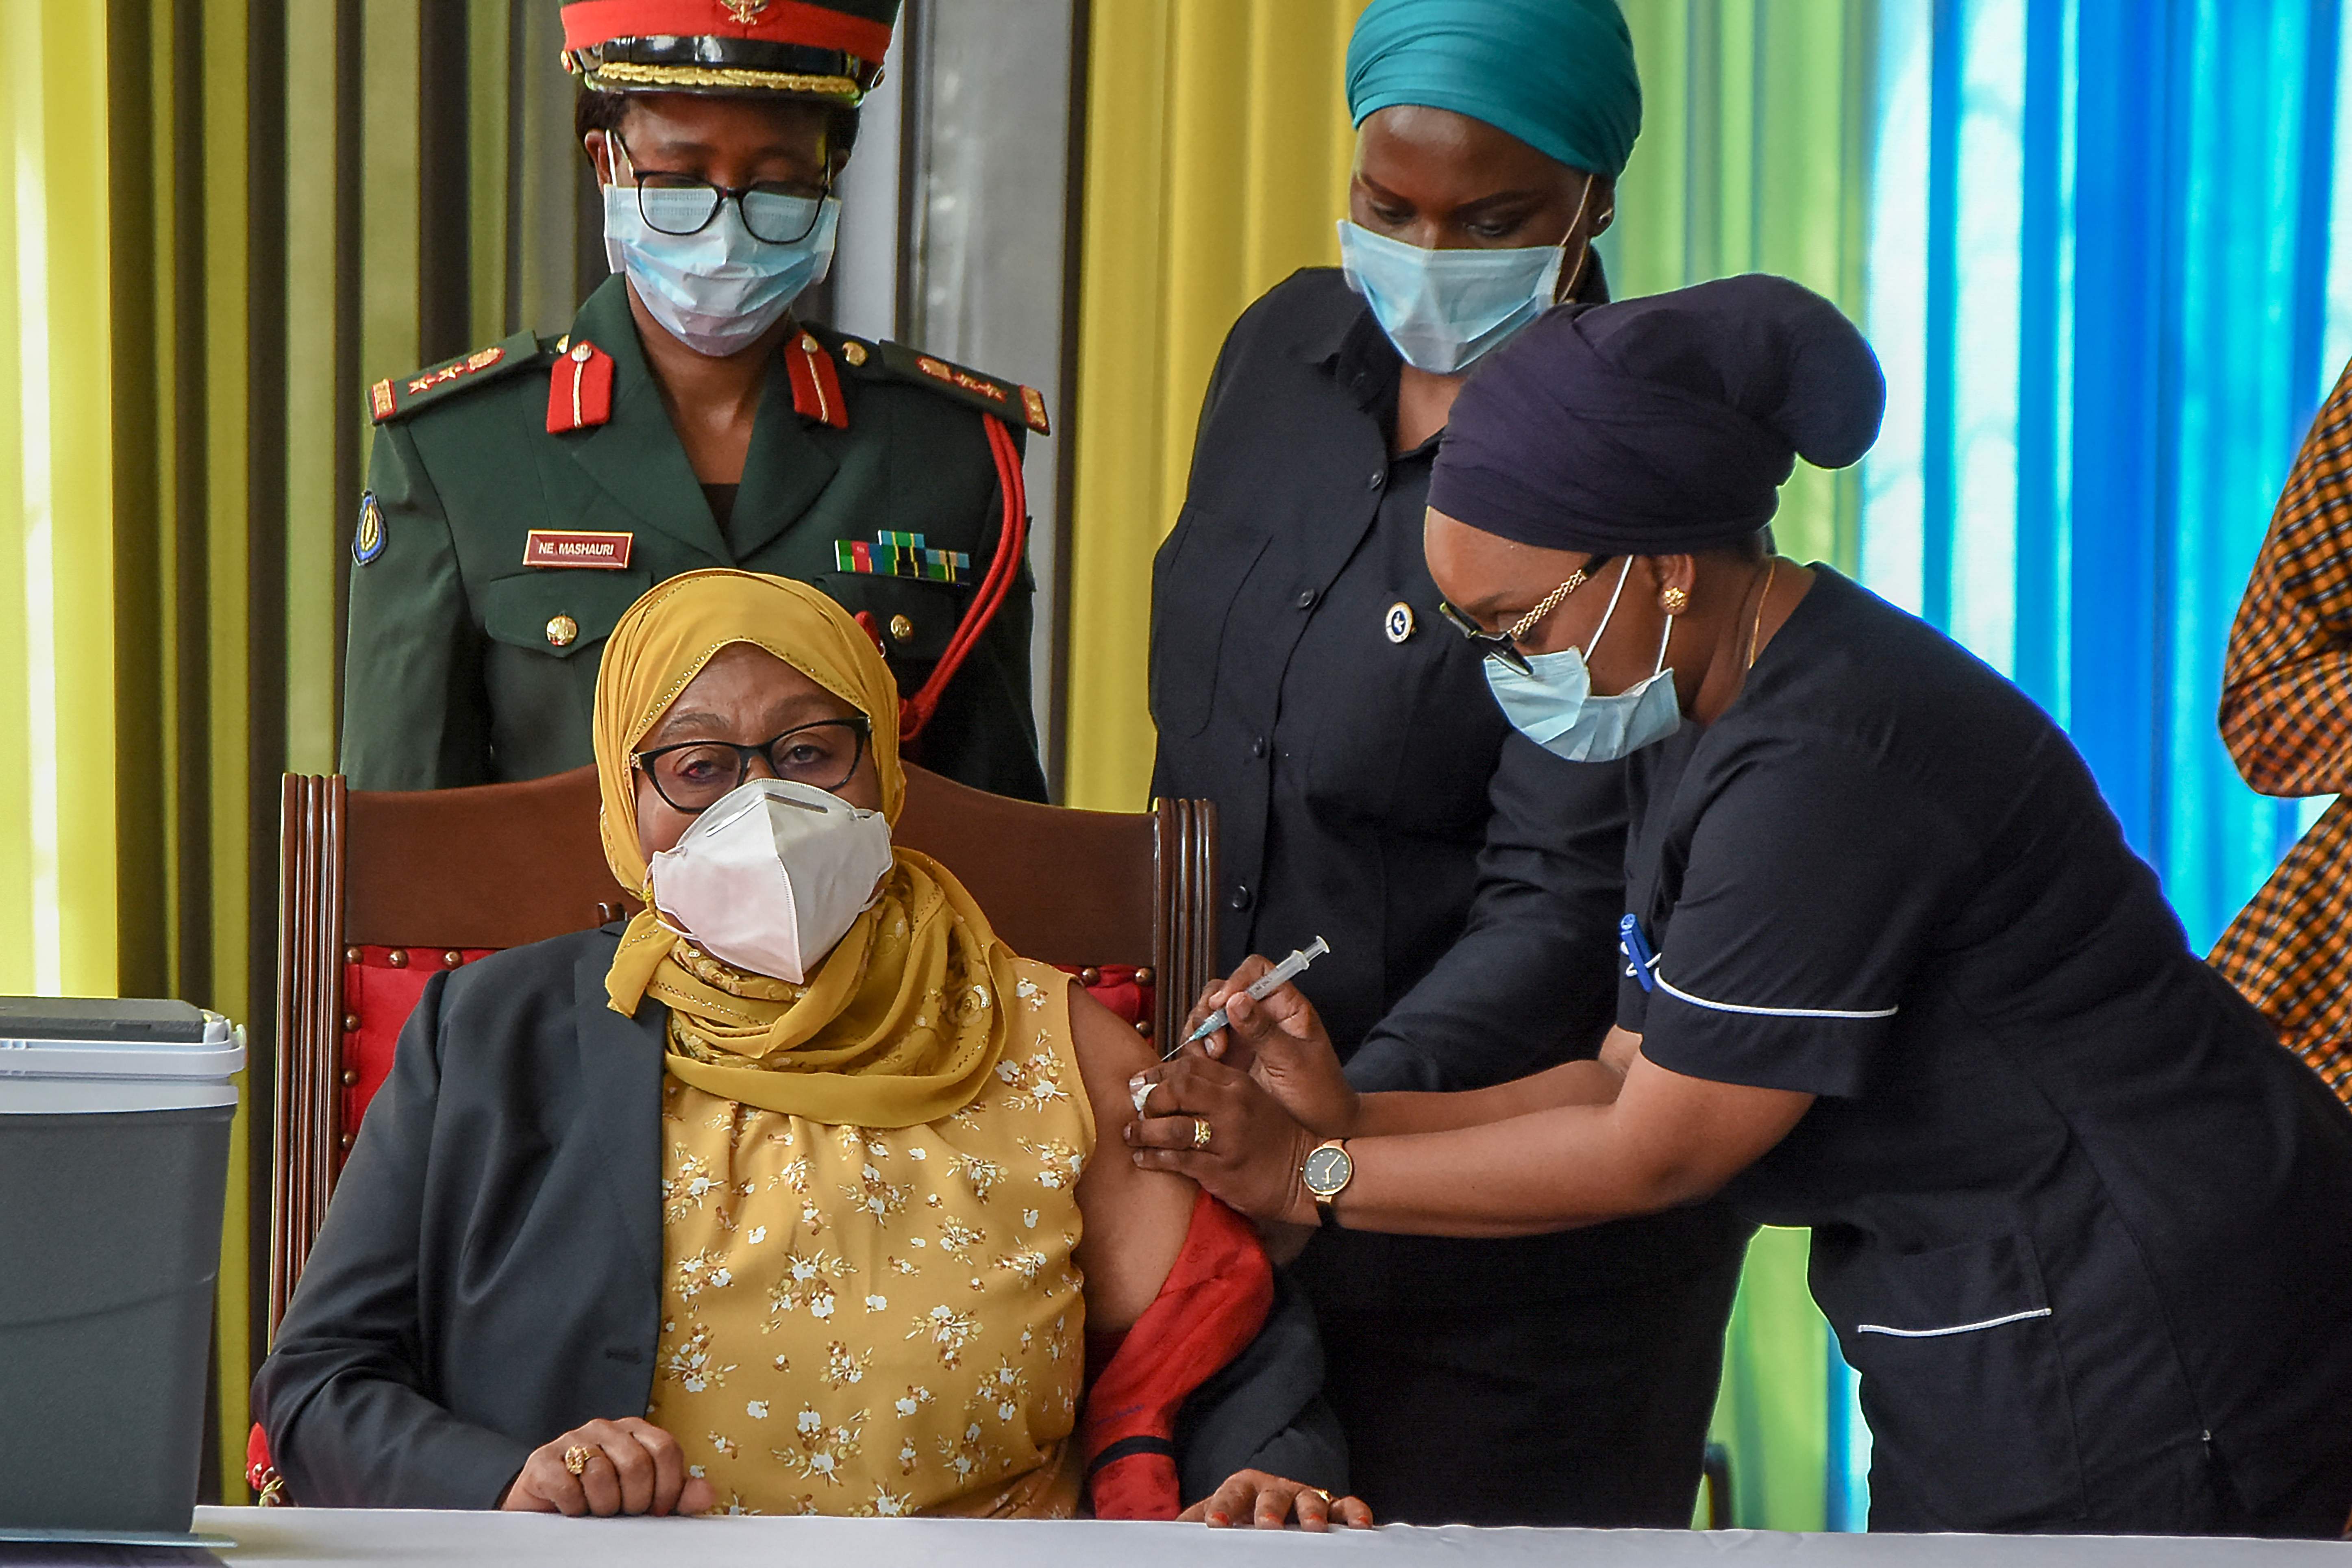 Tanzania's President Samia Suluhu Hassan (L) receives a shot of the Johnson & Johnson vaccine from a health worker at the State House in Dar es Salaam